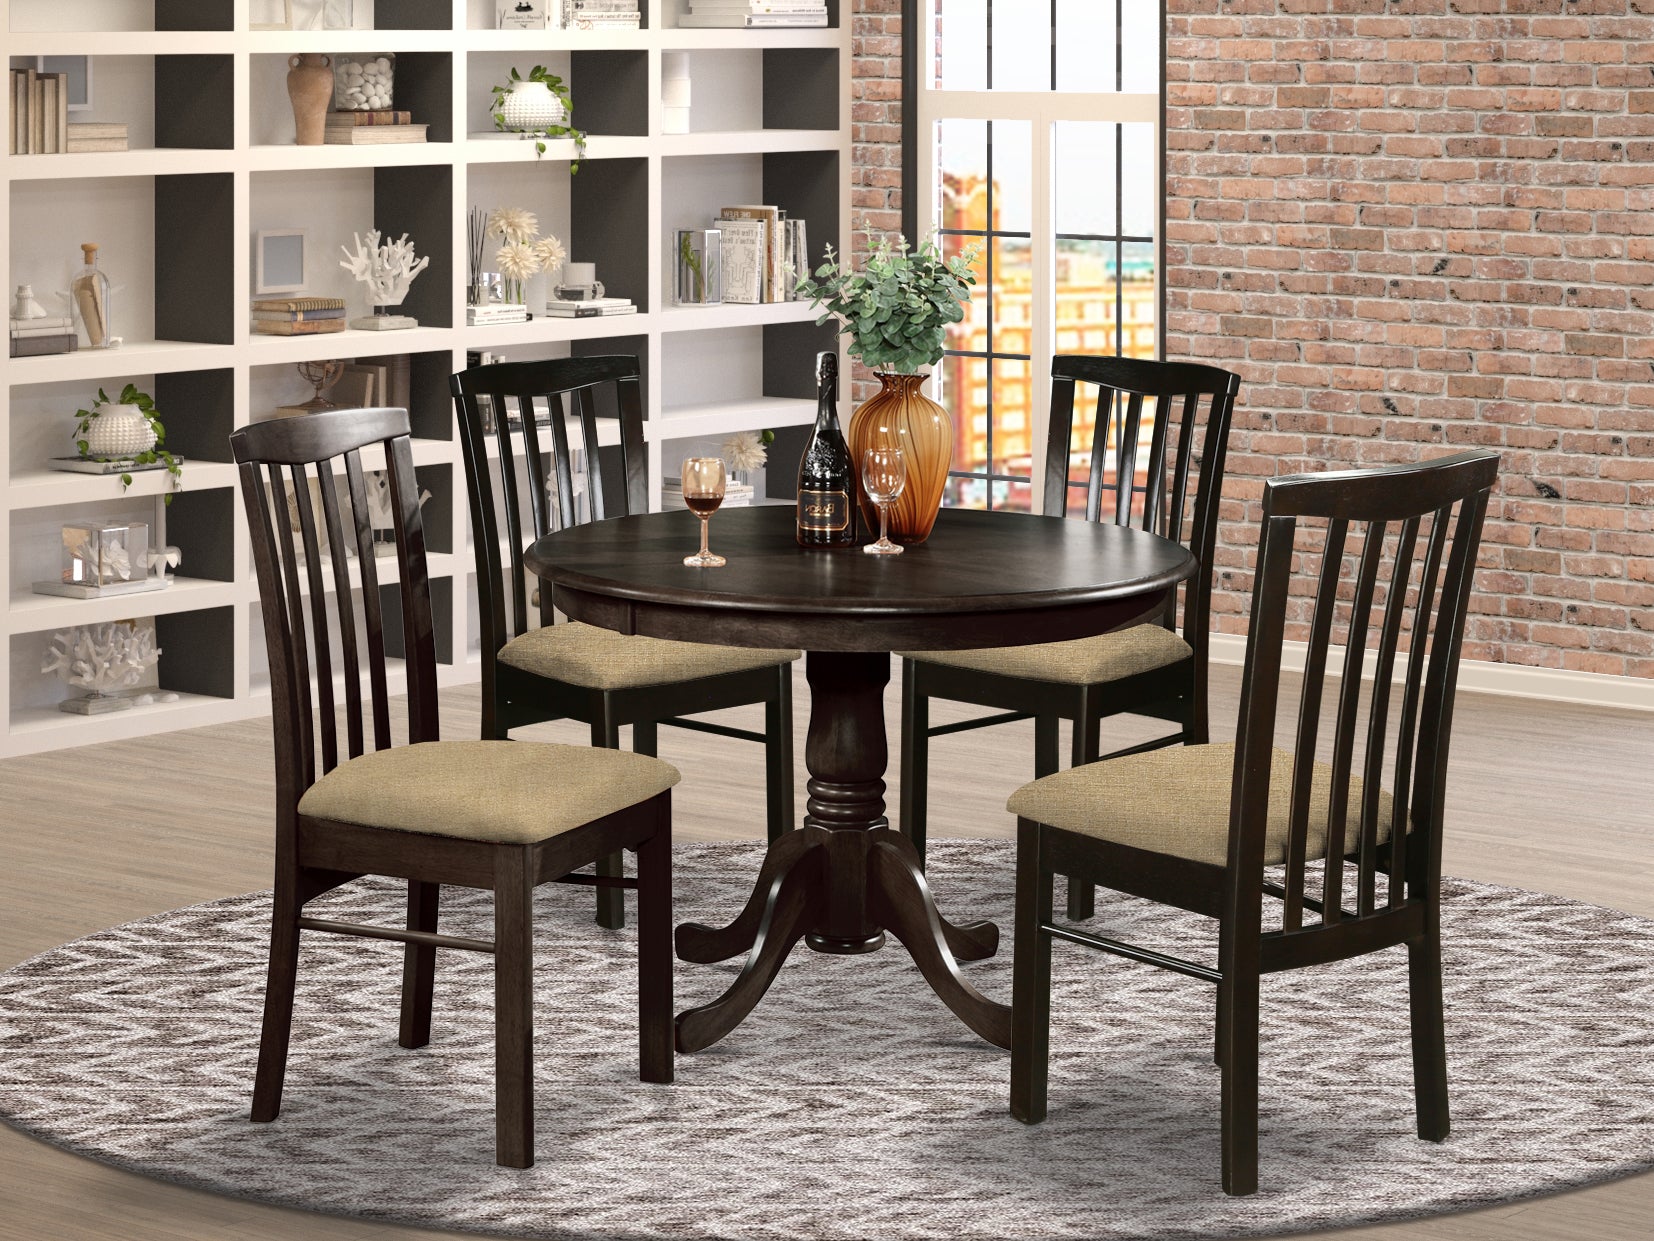 HART5-CAP-C 5 PC Kitchen Table set-Table Round Table and 4 Dining Chairs